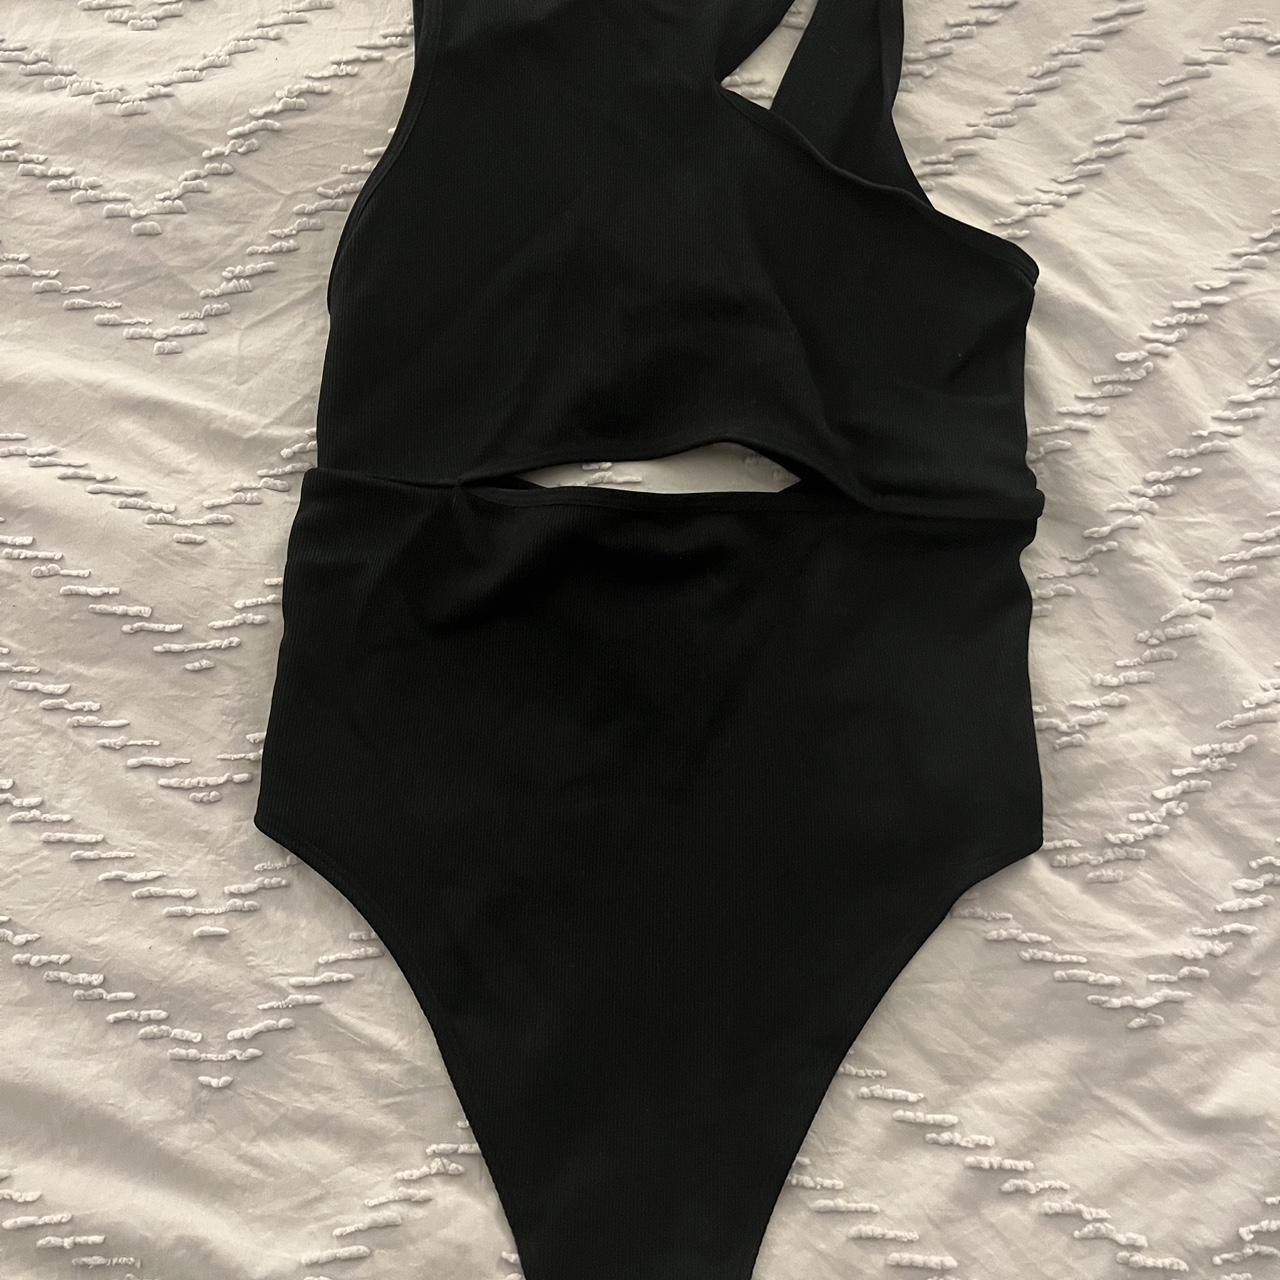 never worn colsie body suit from target size xs - Depop